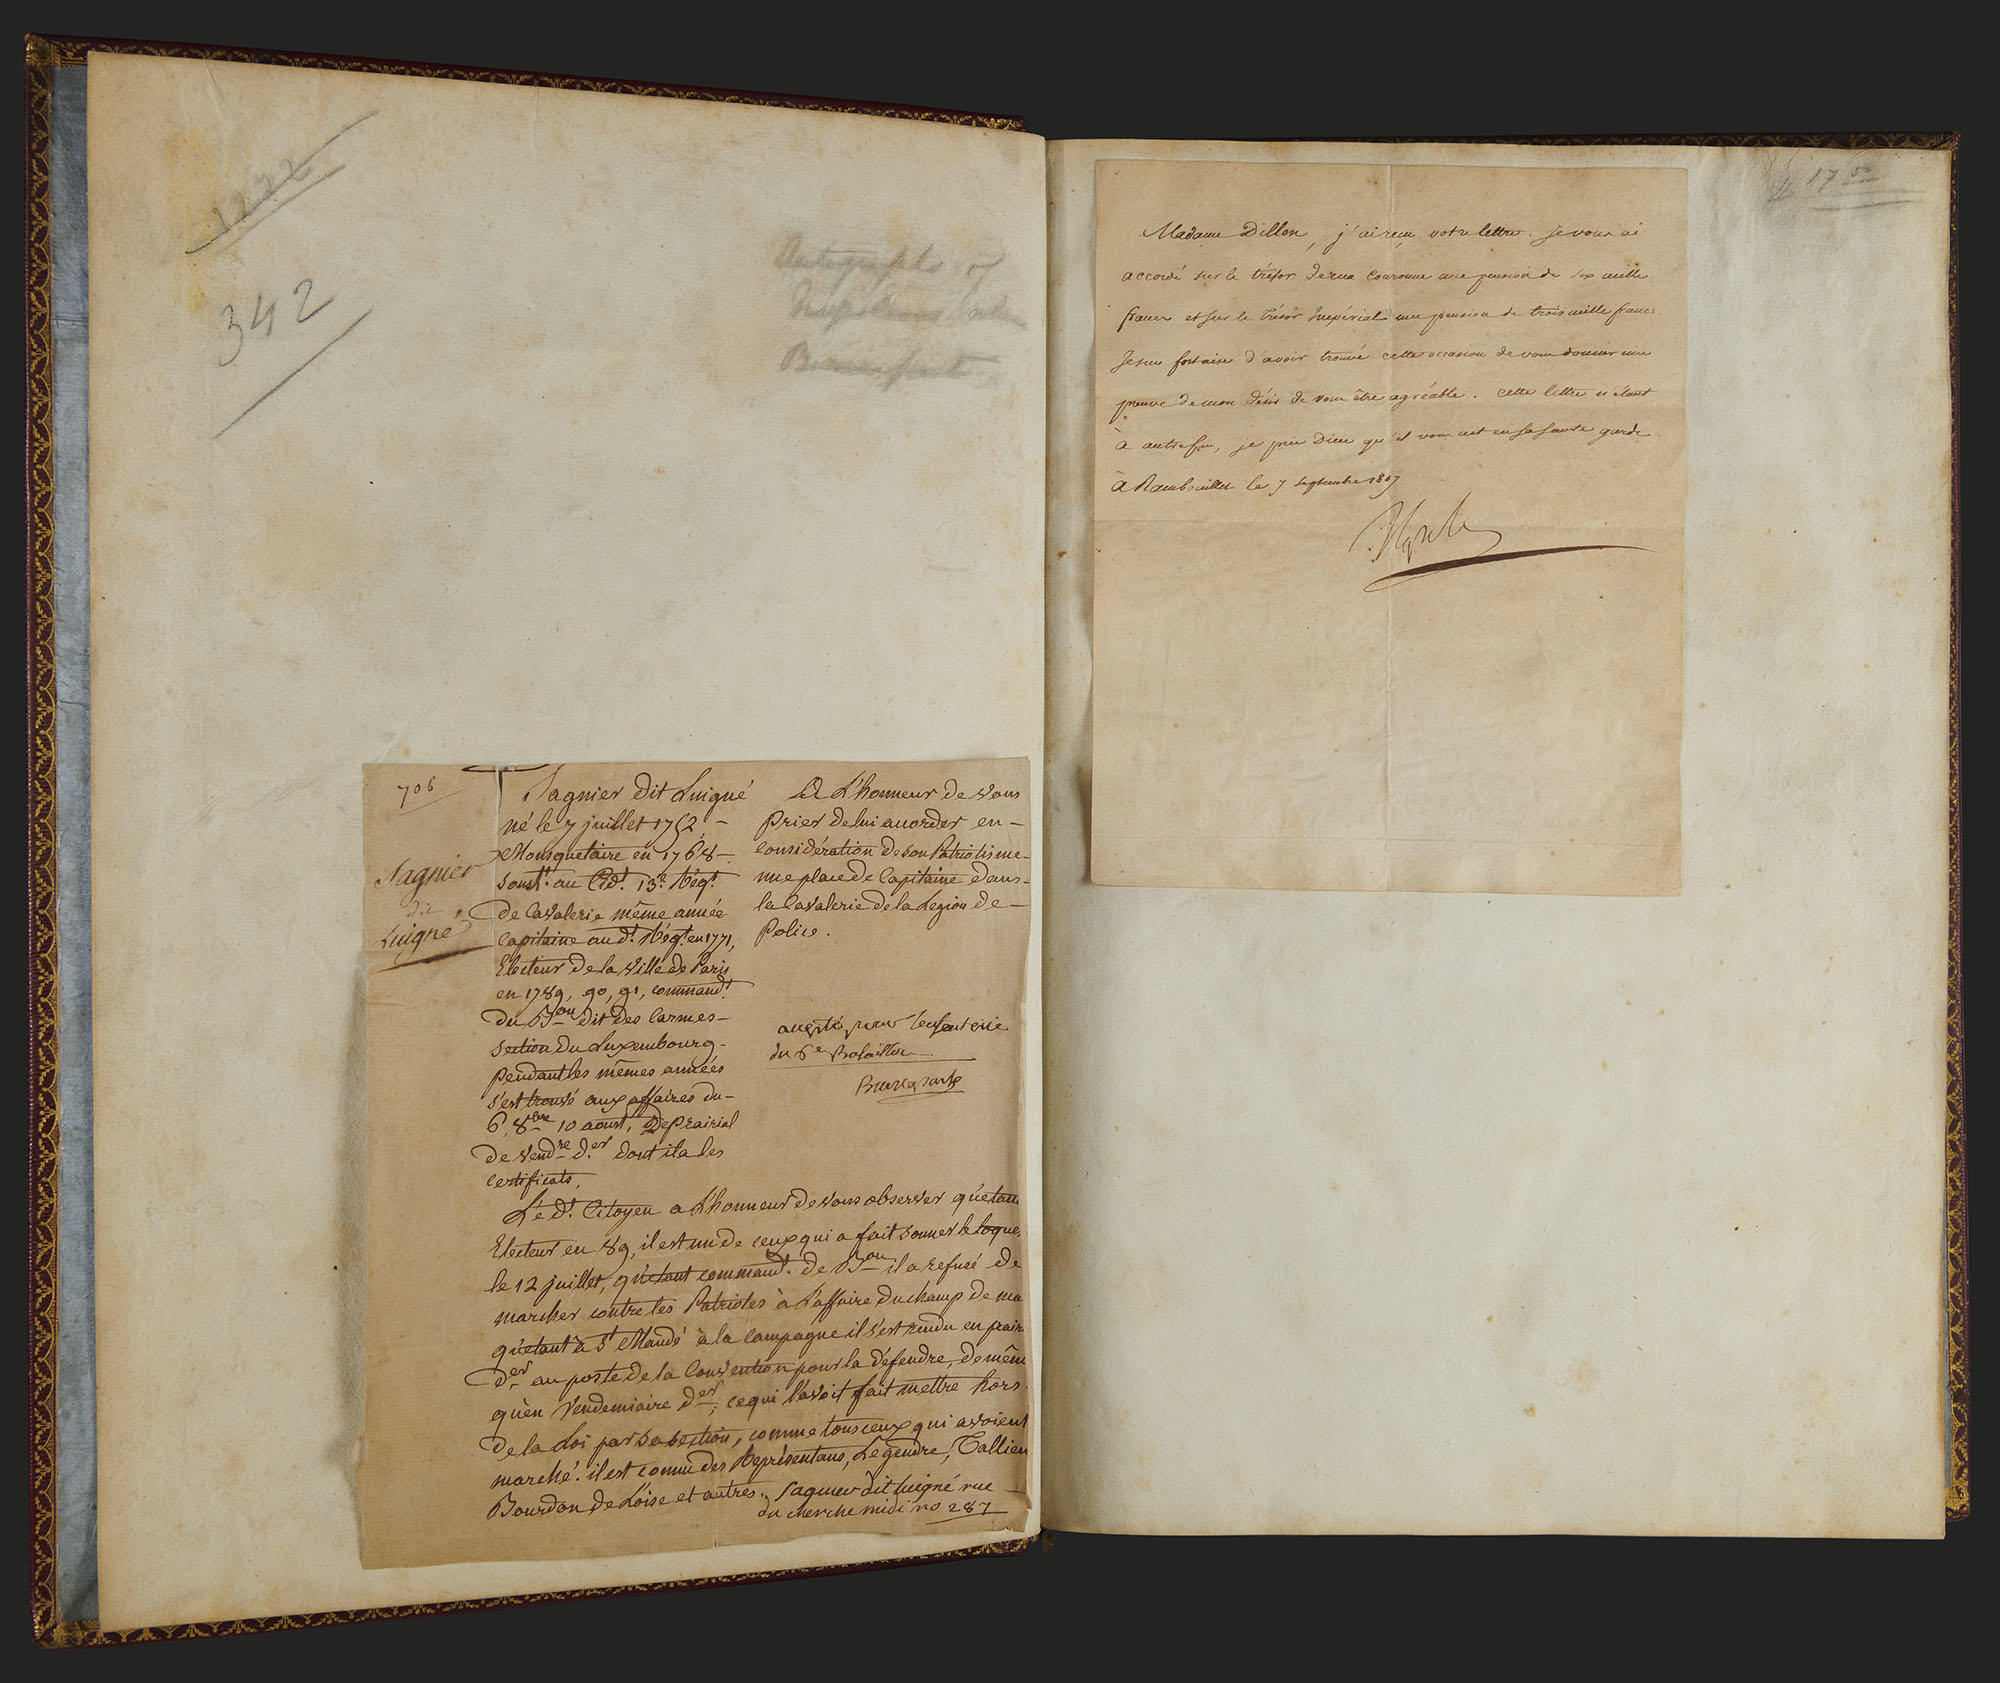 Open copy of Recueil Méthodique showing two blank pages with handwritten letters from Napoleon Bonaparte pasted on them.